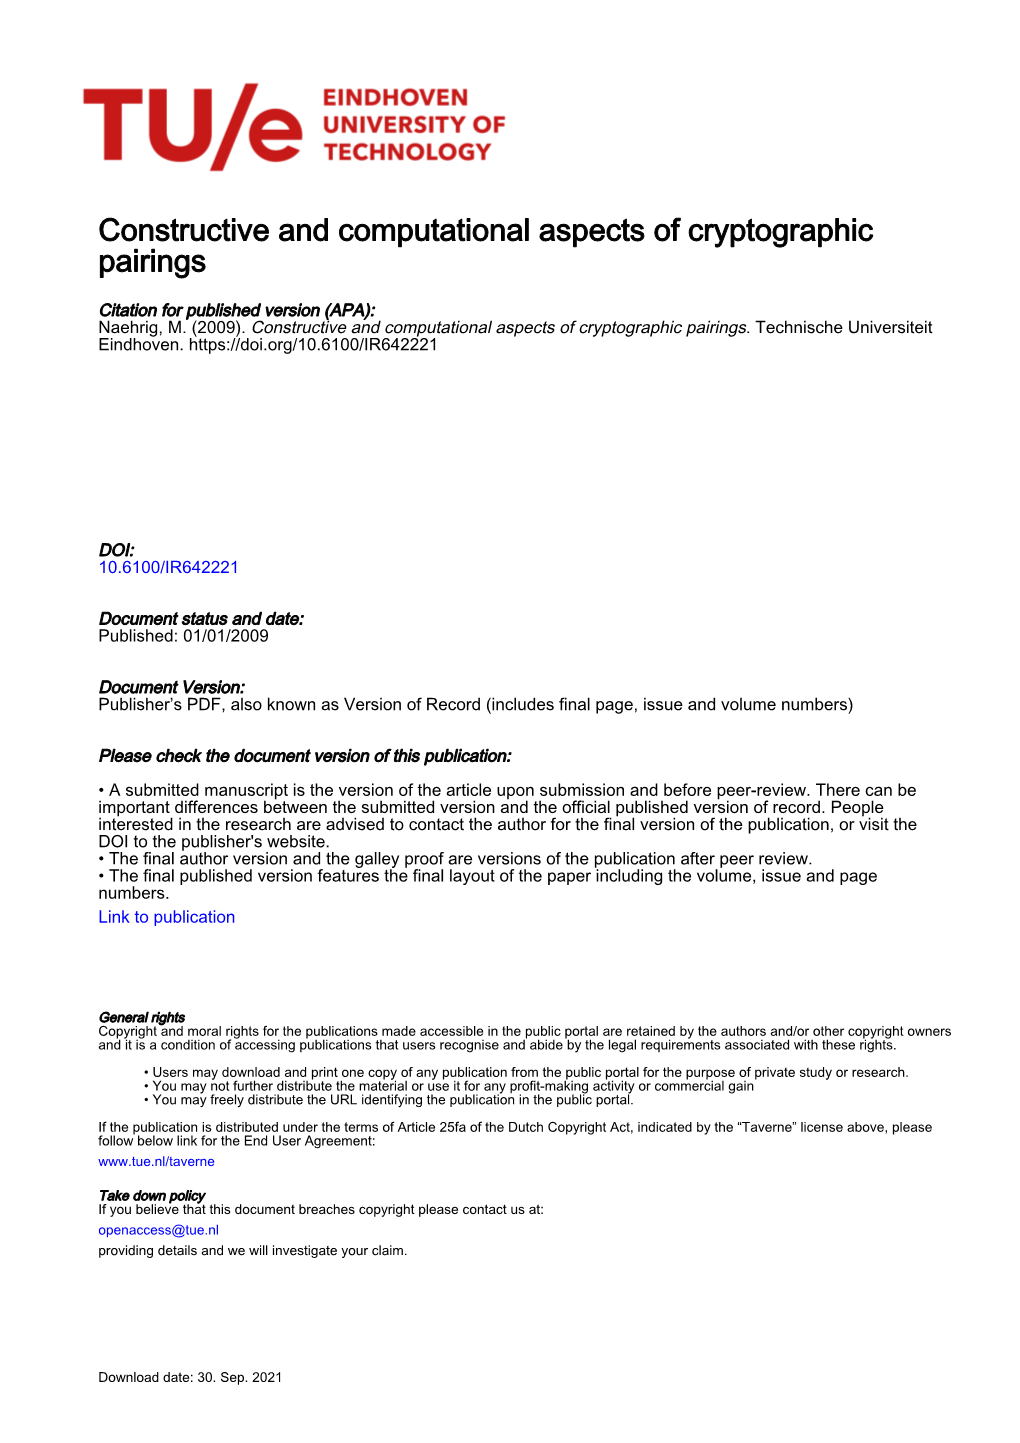 Constructive and Computational Aspects of Cryptographic Pairings